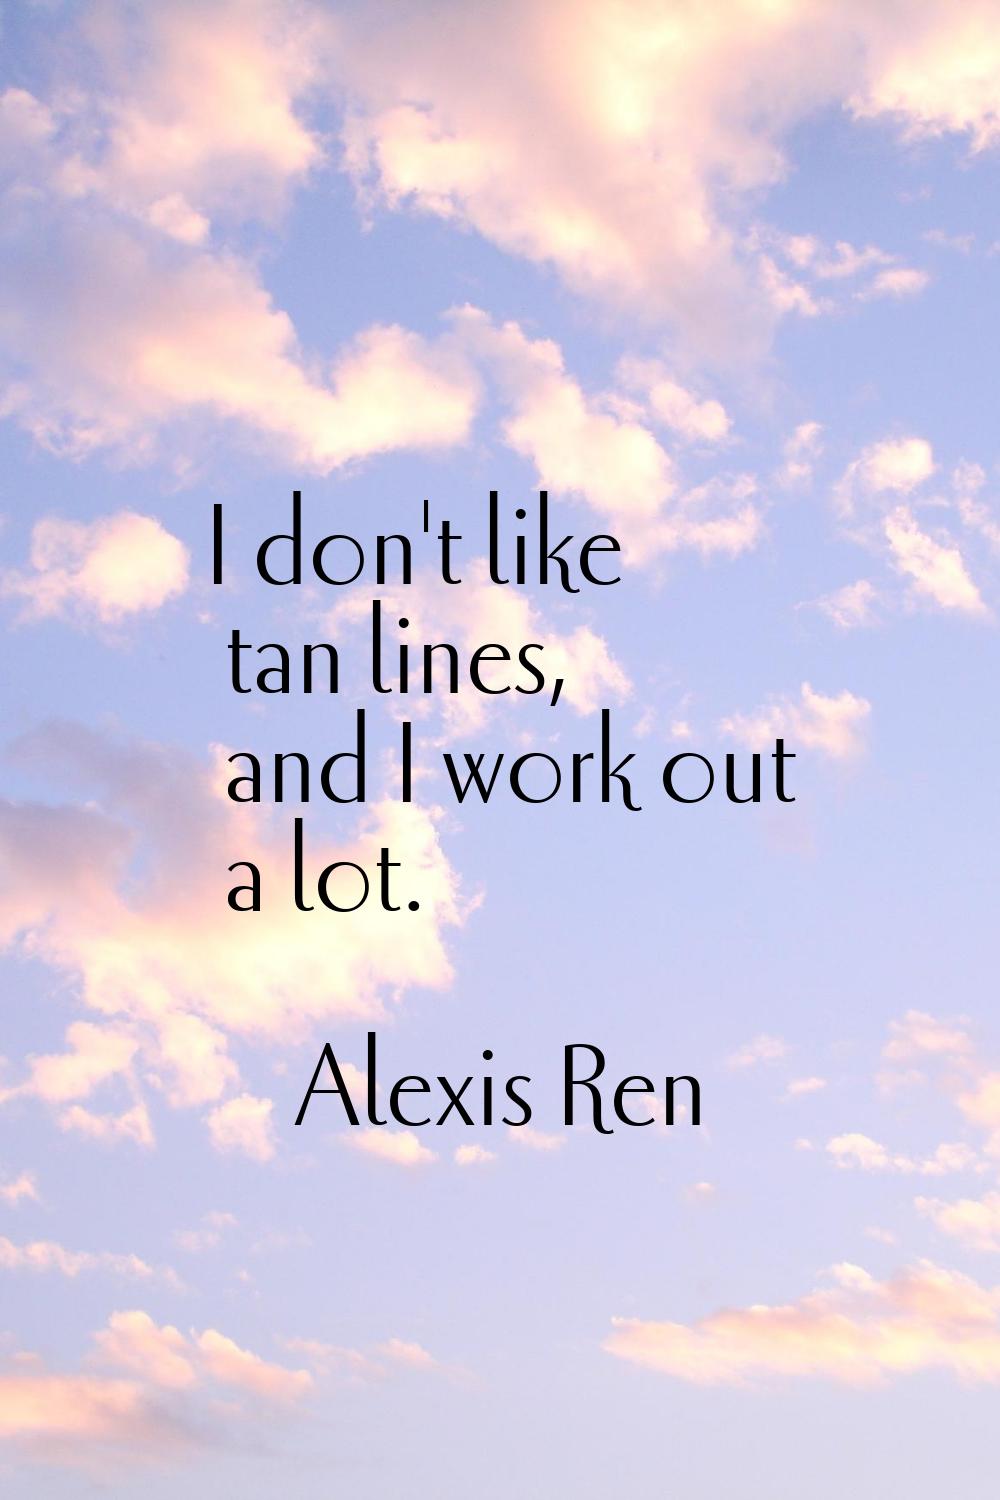 I don't like tan lines, and I work out a lot.